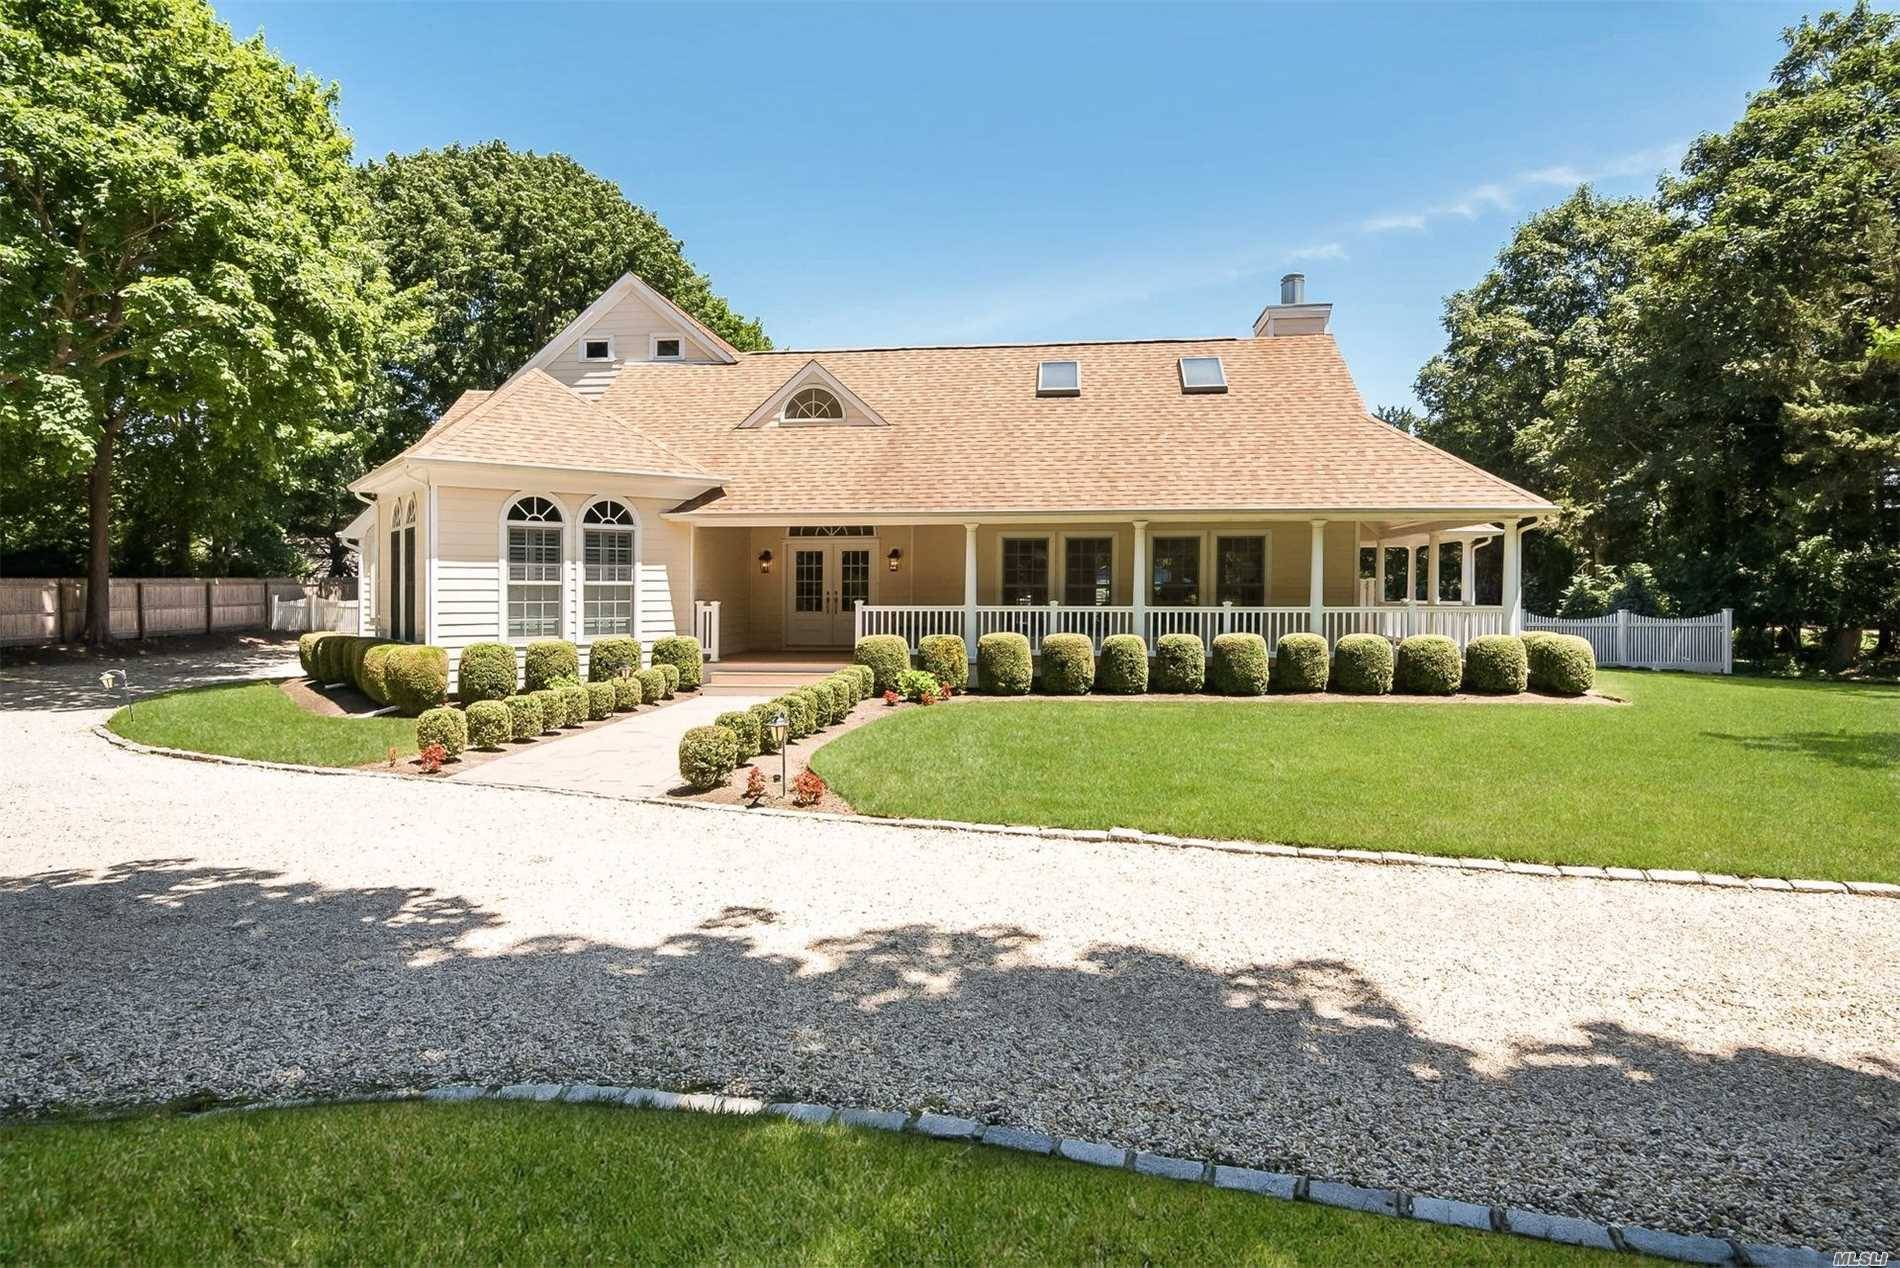 This Meticulous Home Is Set On Just Shy An Acre South Of The Highway In Quiogue.